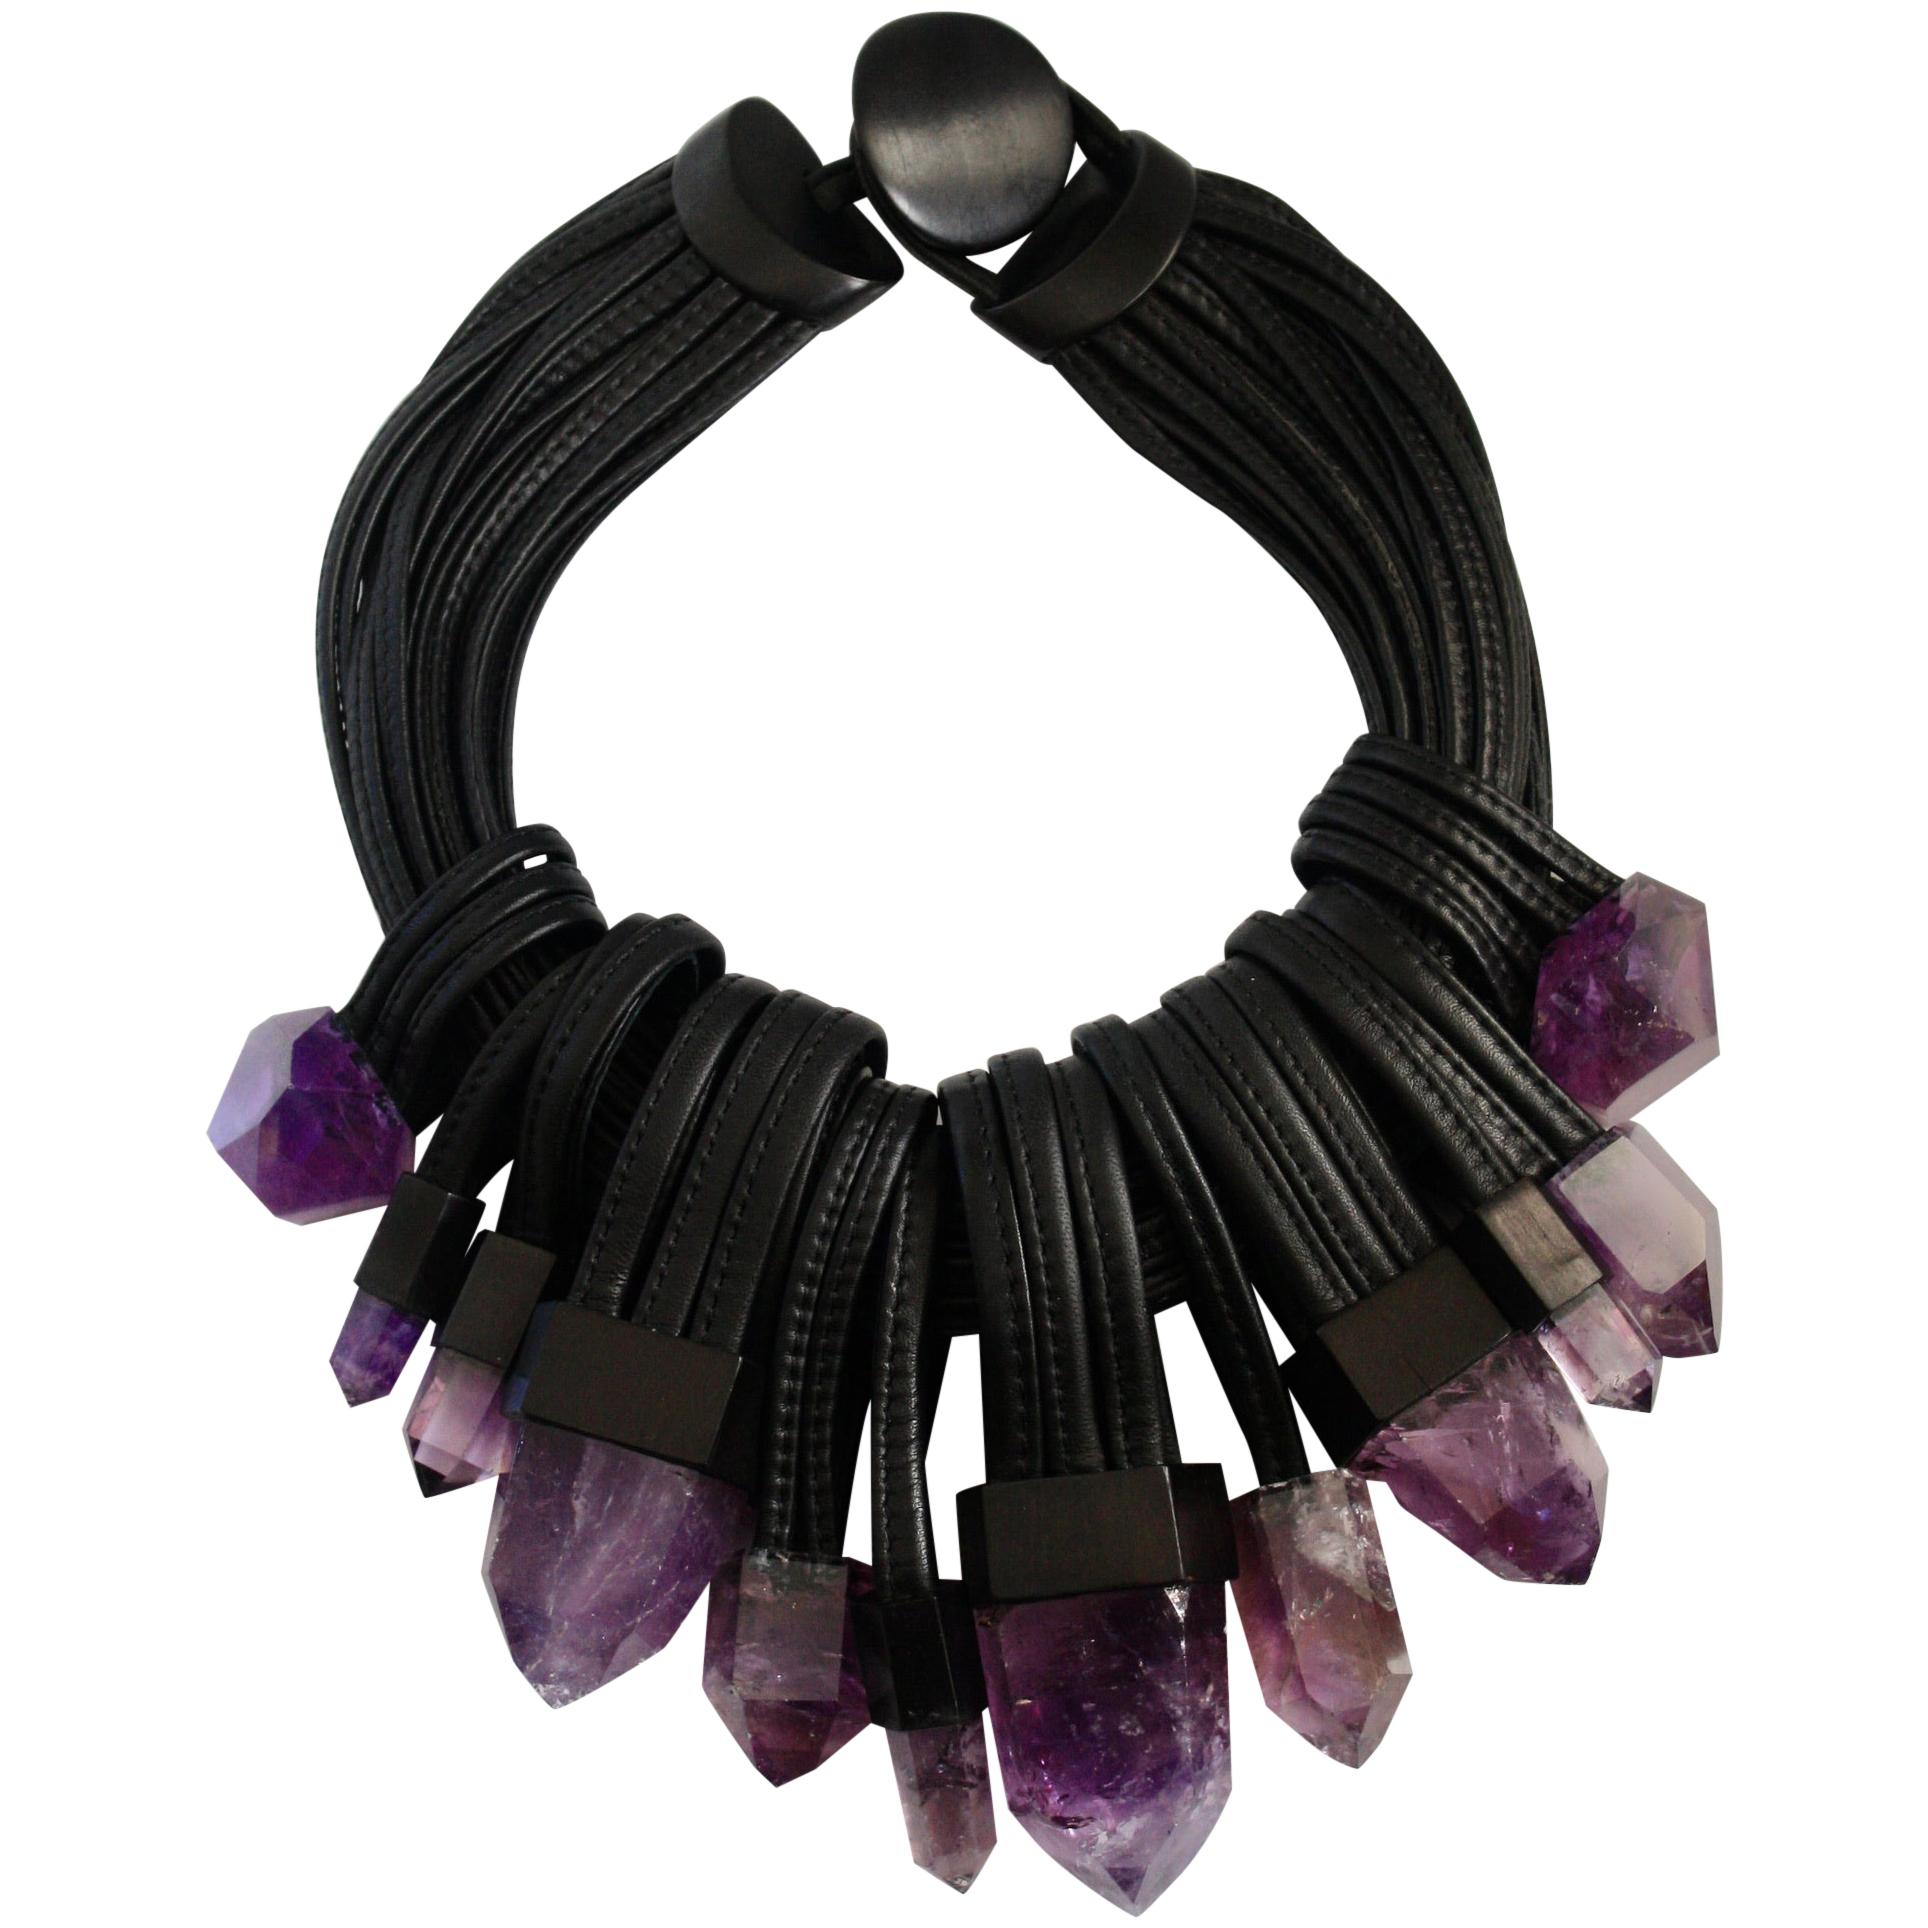 Monies Unique Amethyst and Leather Choker